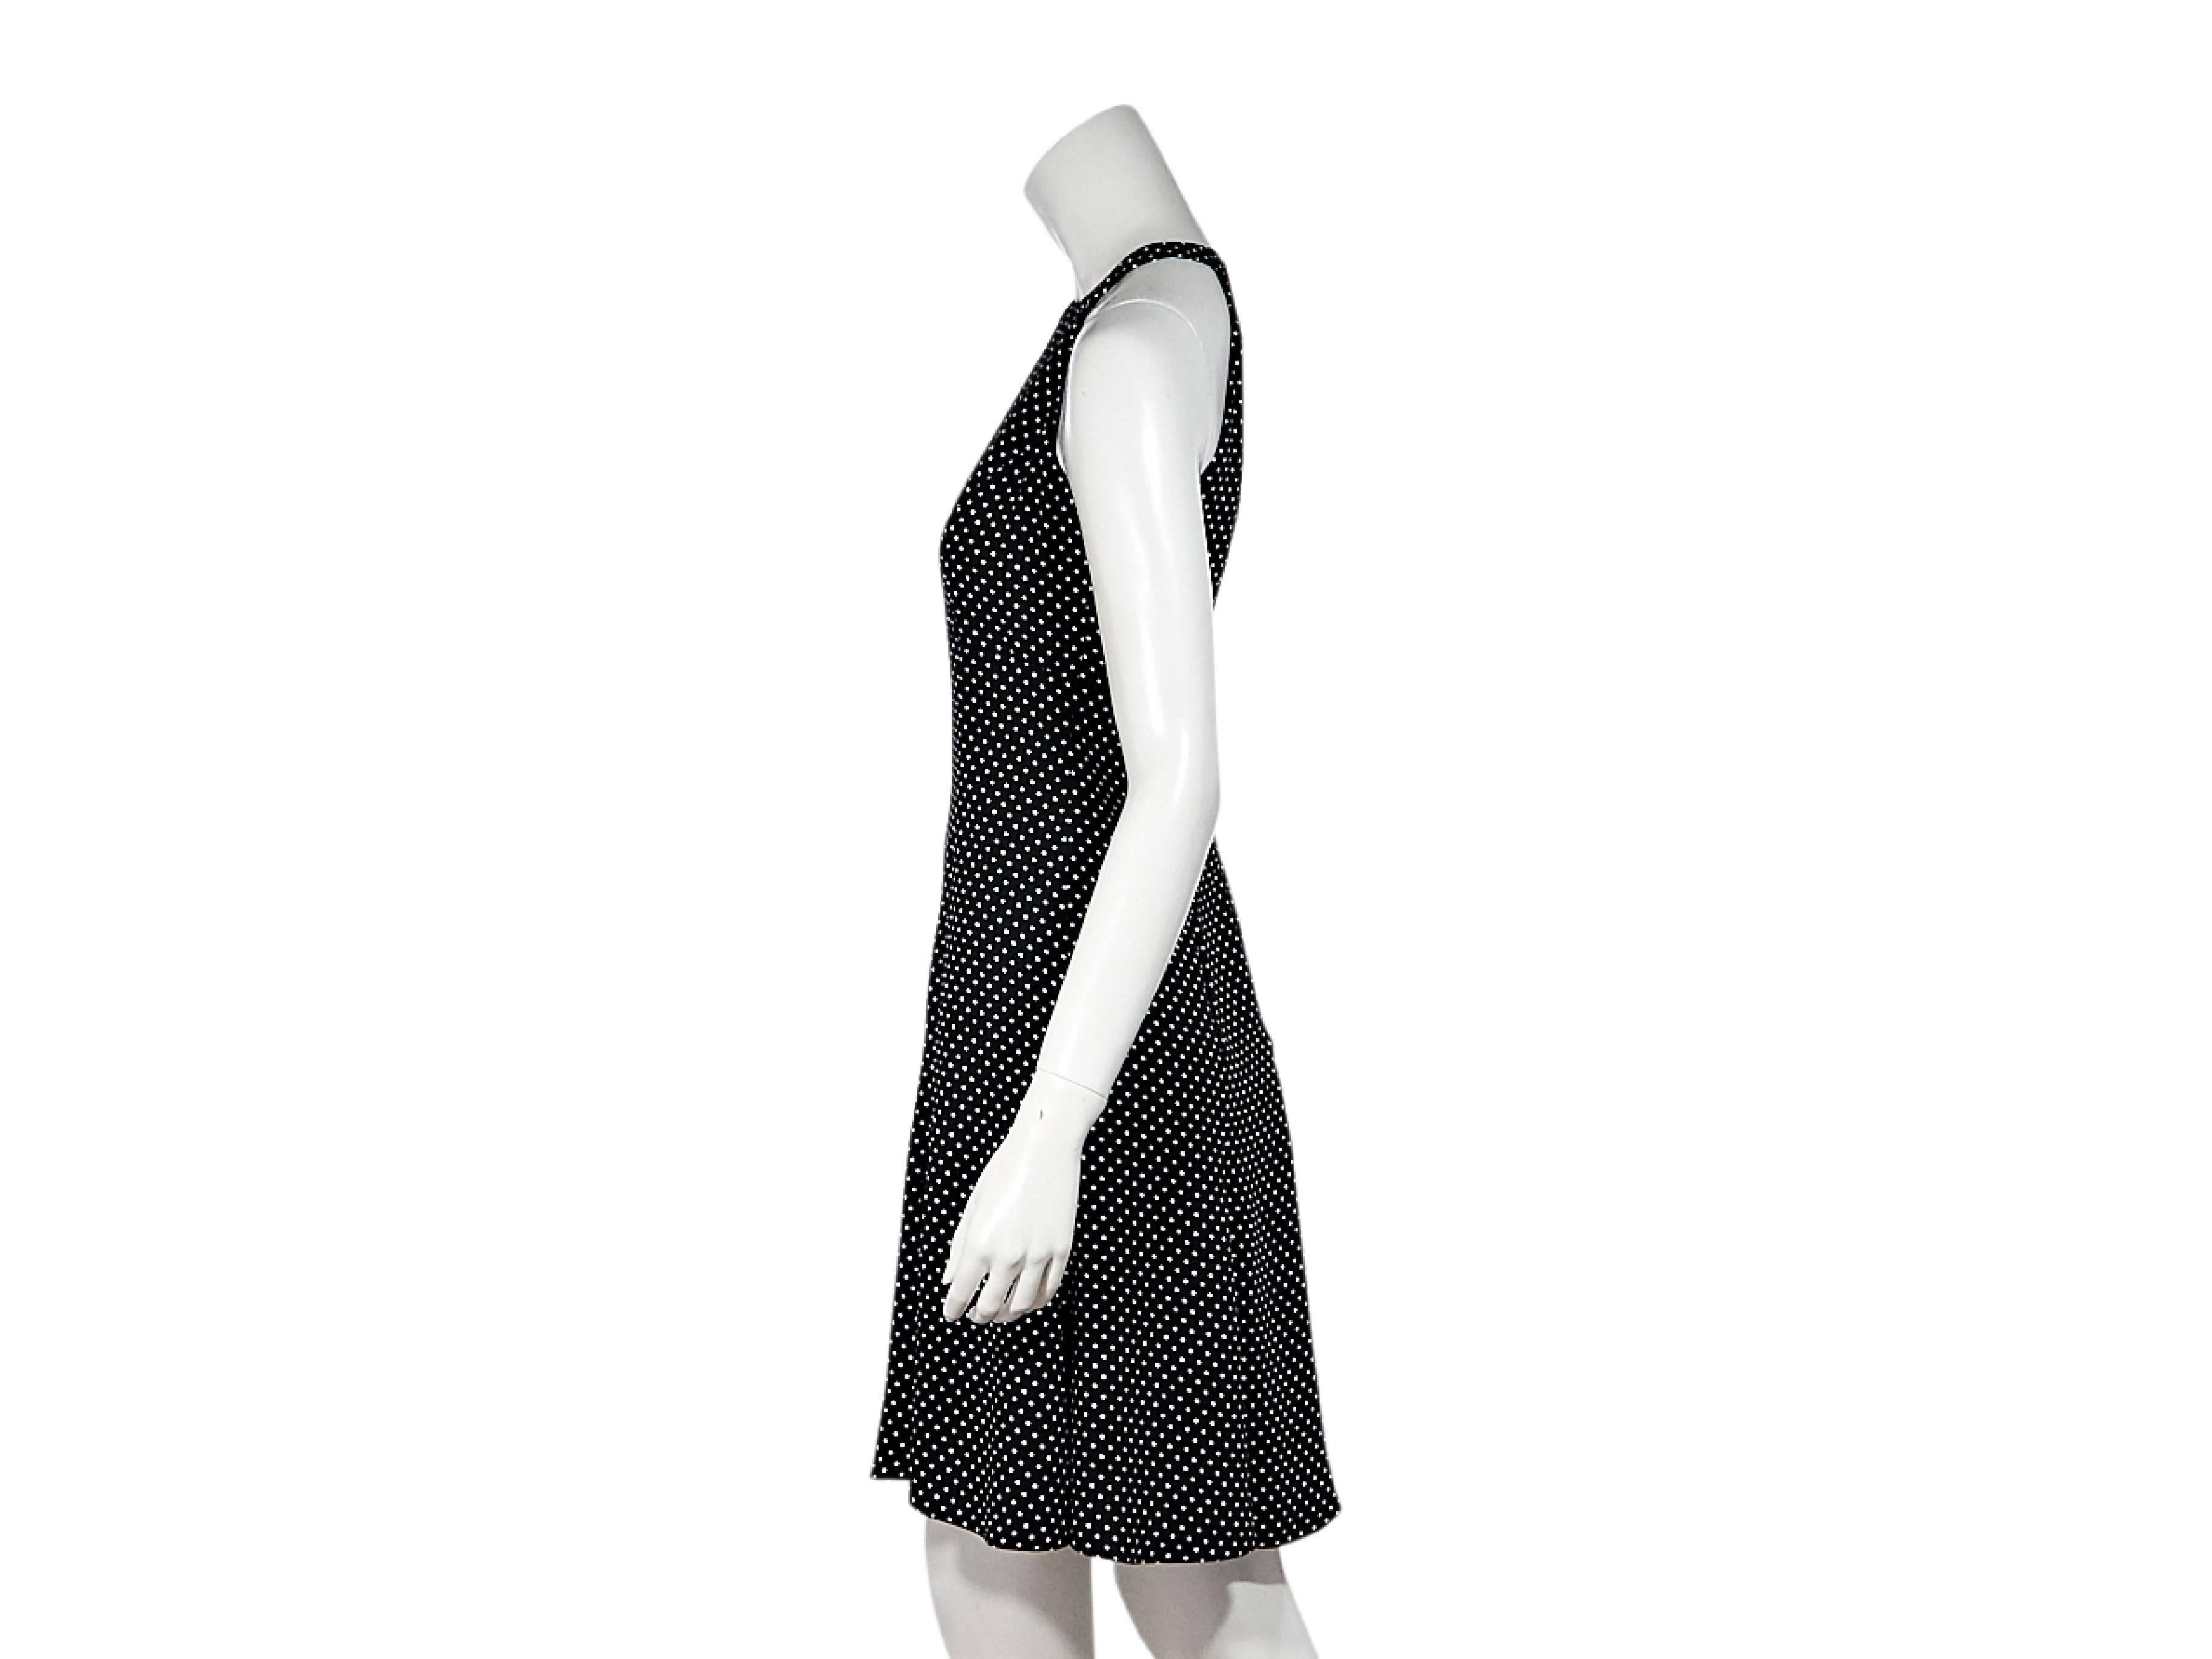 Product details:  Black and white polka-dot printed sheath dress by Michael Kors Collection.  Halter-style neckline.  Sleeveless.  Concealed back zip closure.  Flared skirting.  
Condition: Pre-owned. New with tags  
Est. Retail $ 1,350.00